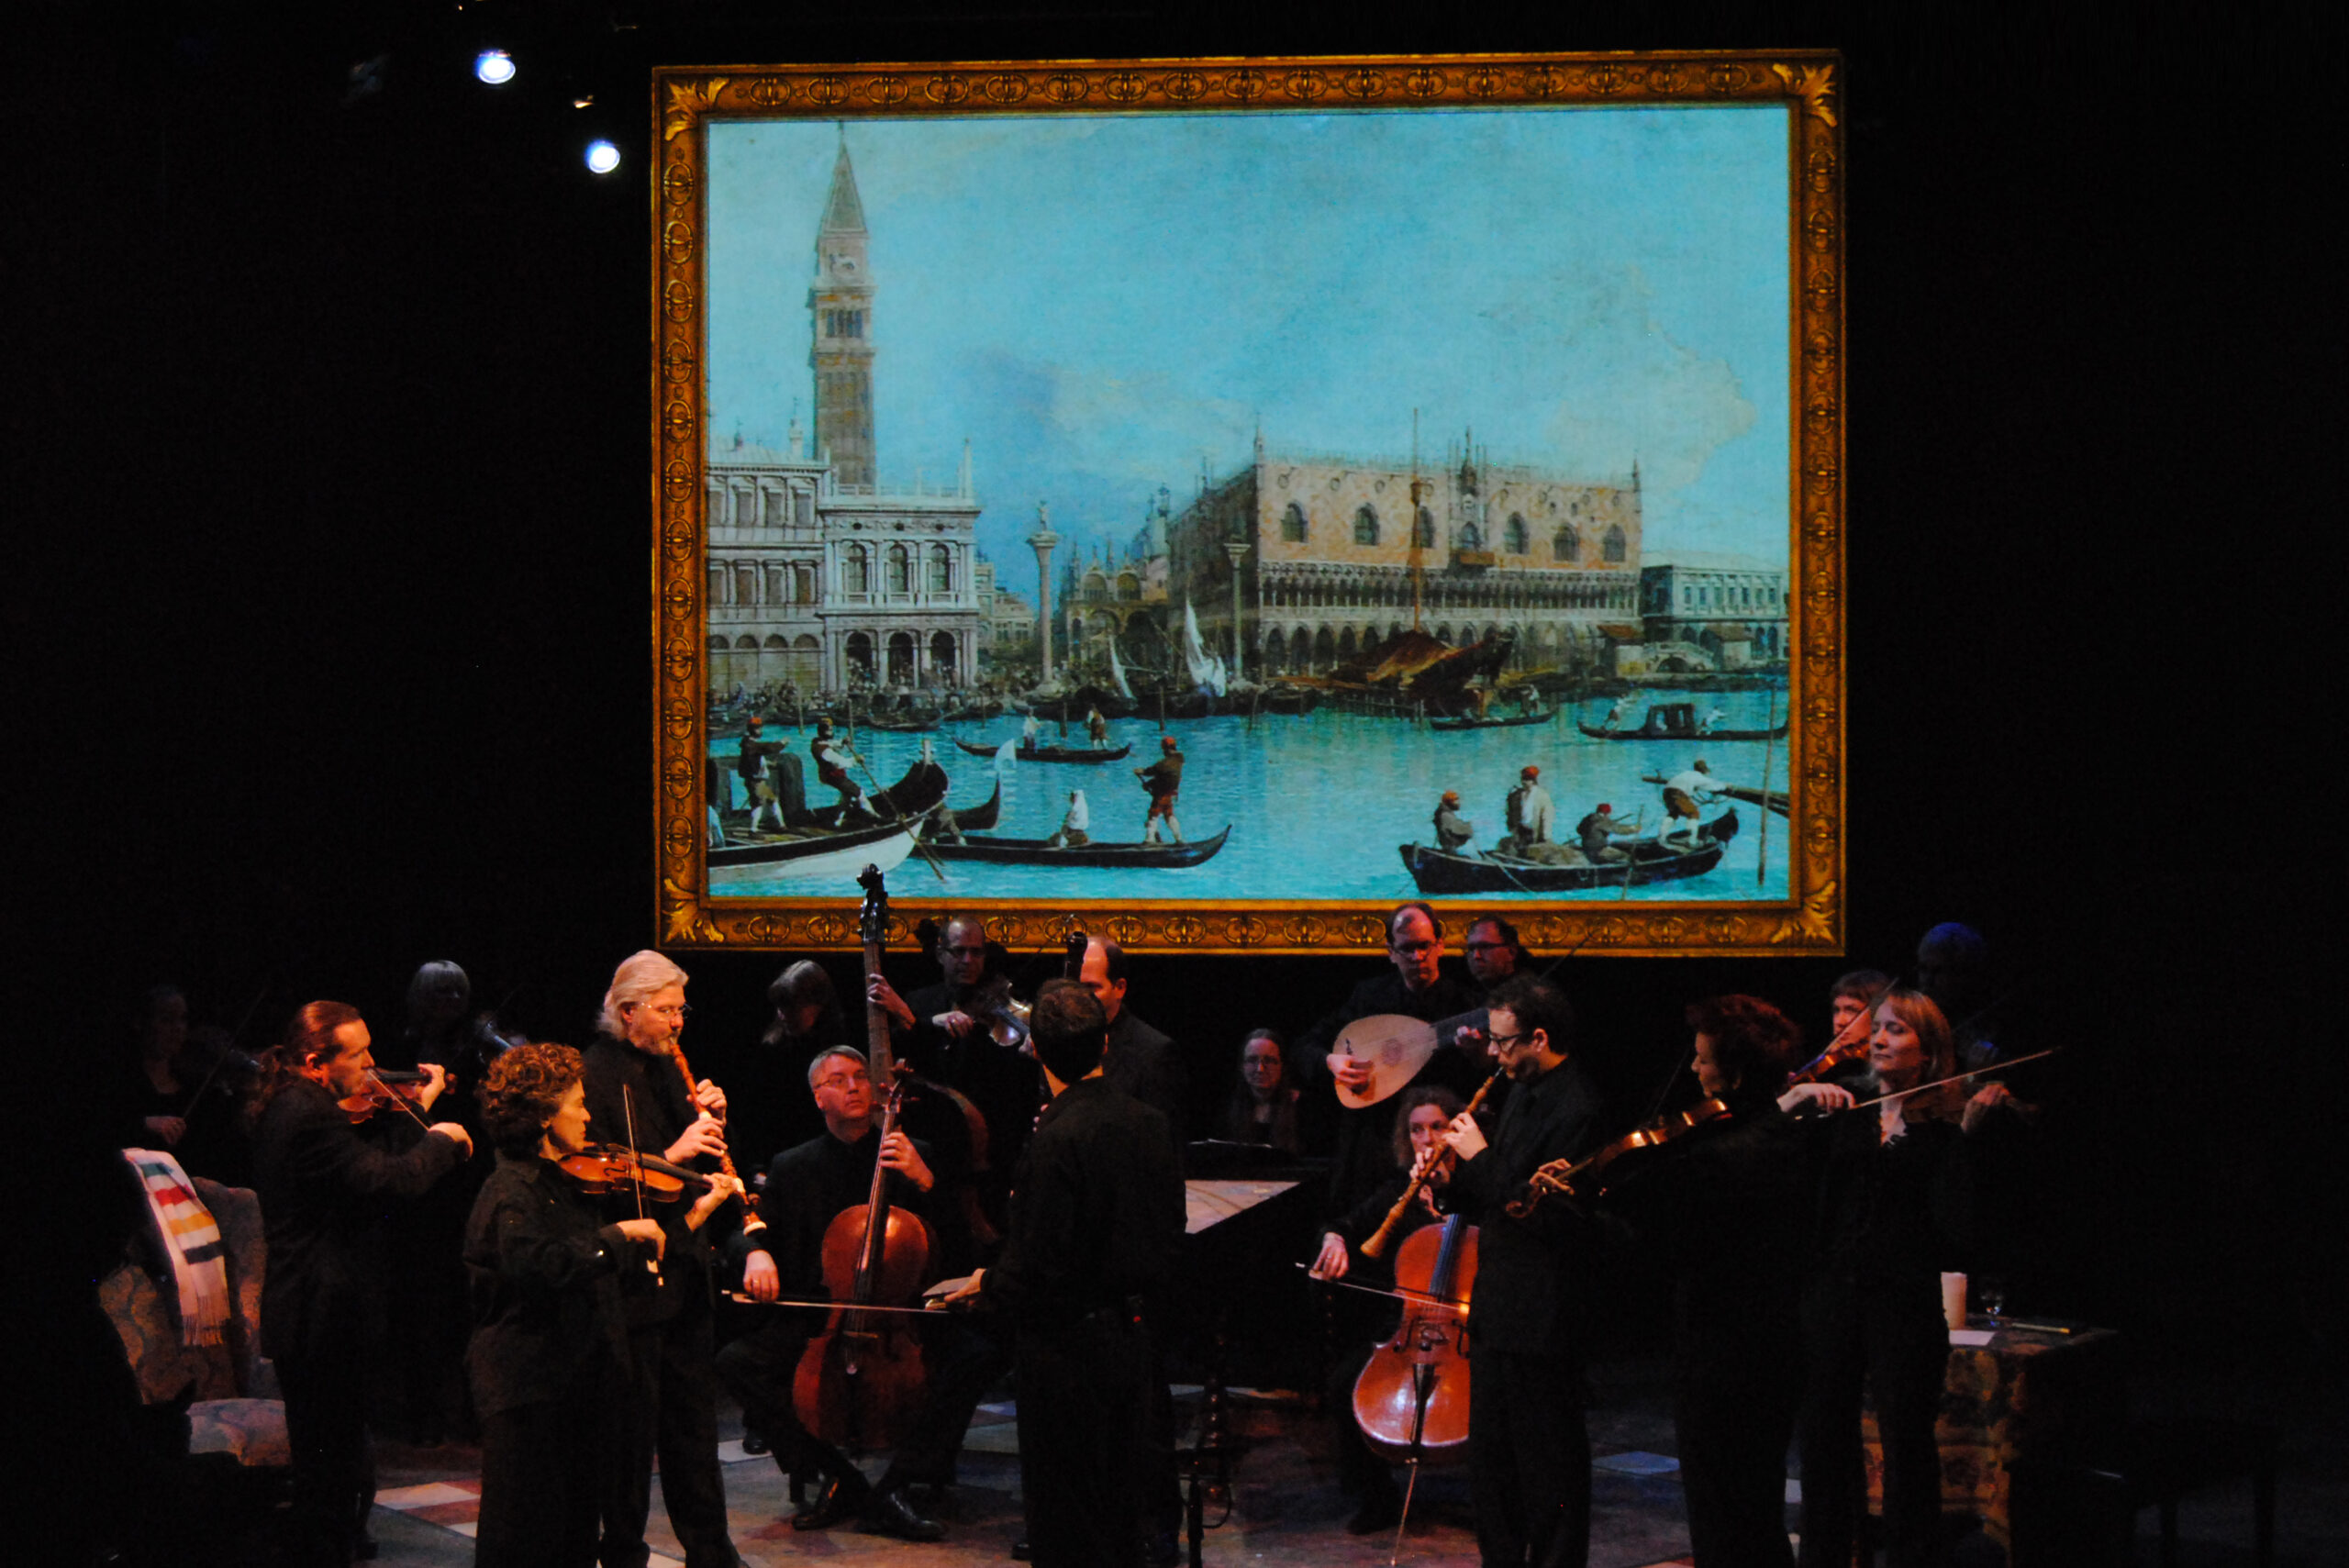 Tafelmusik with Canaletto The Palazzo Ducale, Venice